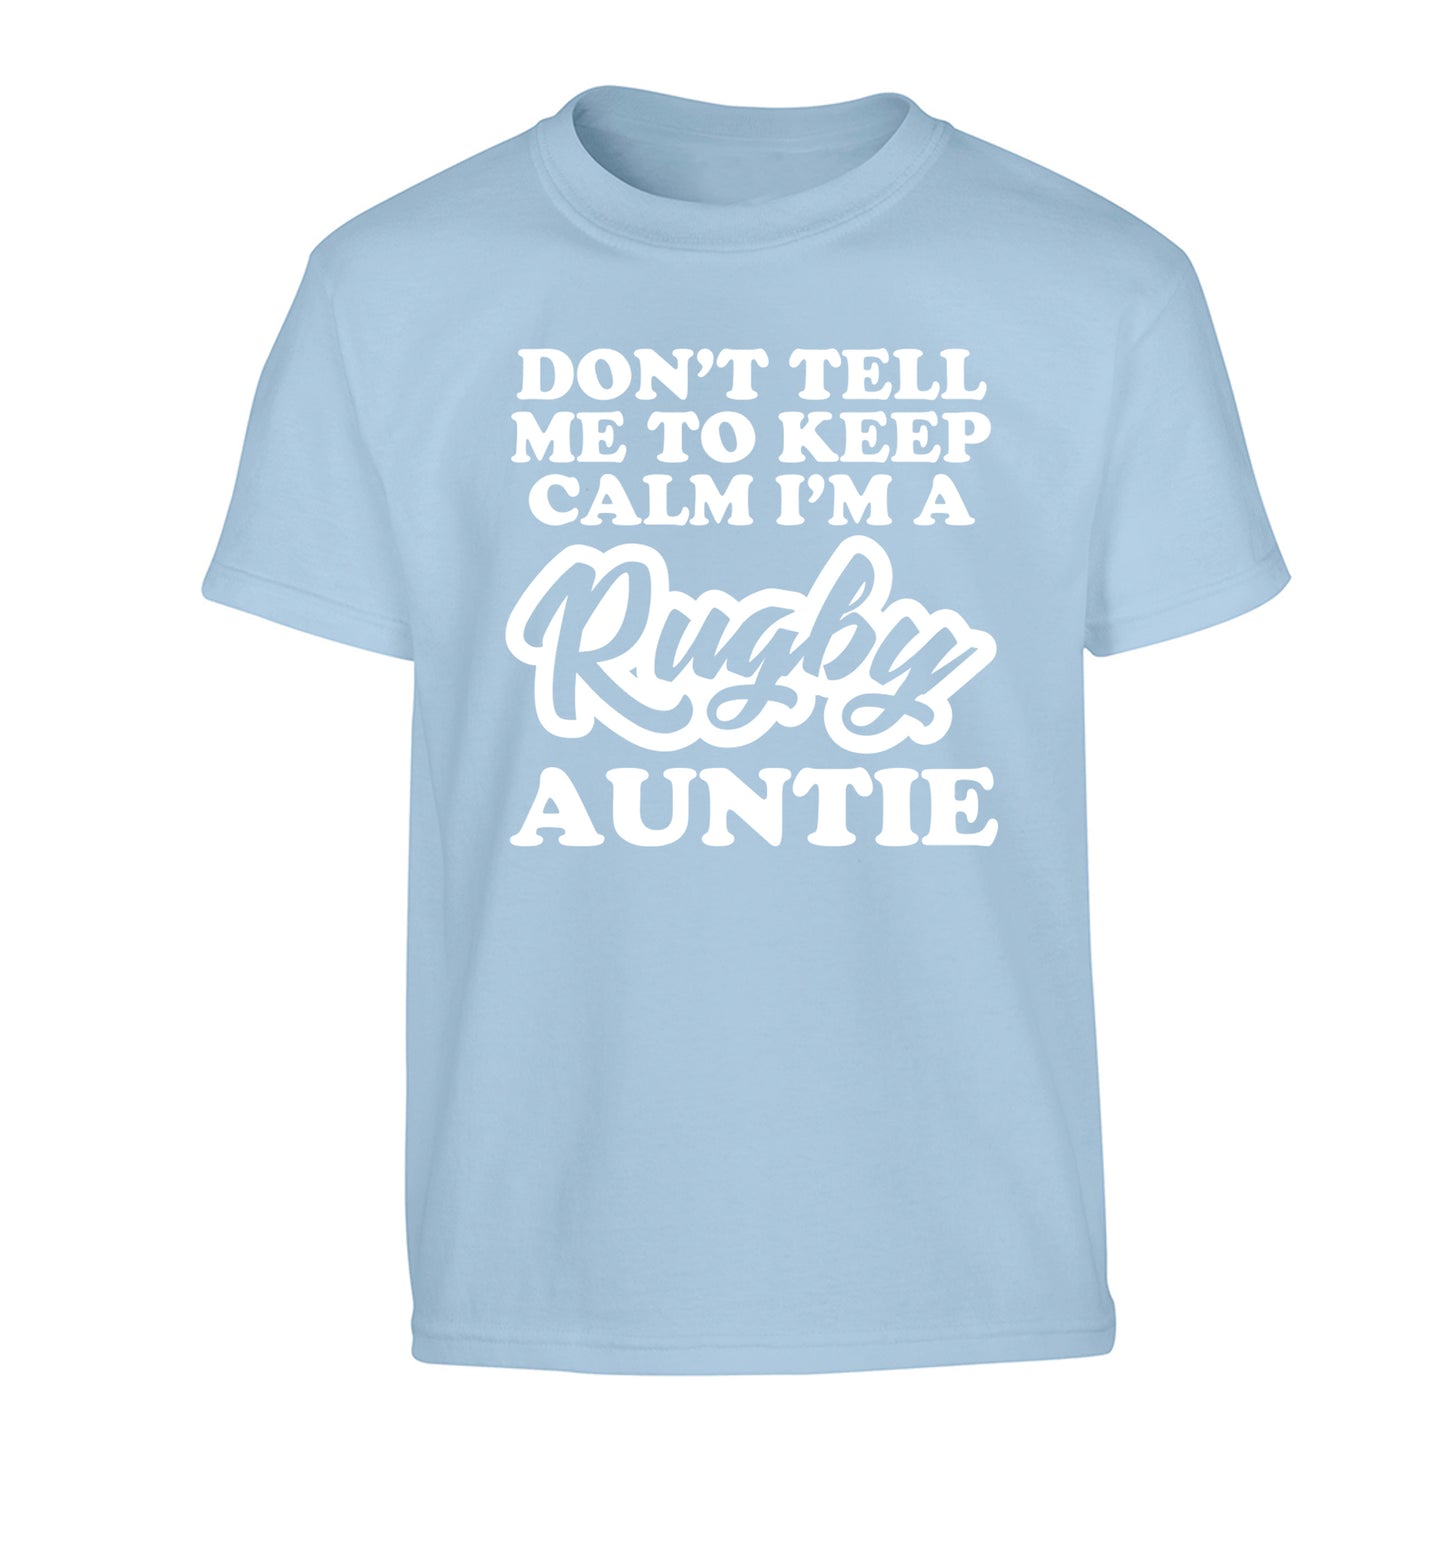 Don't tell me keep calm I'm a rugby auntie Children's light blue Tshirt 12-13 Years